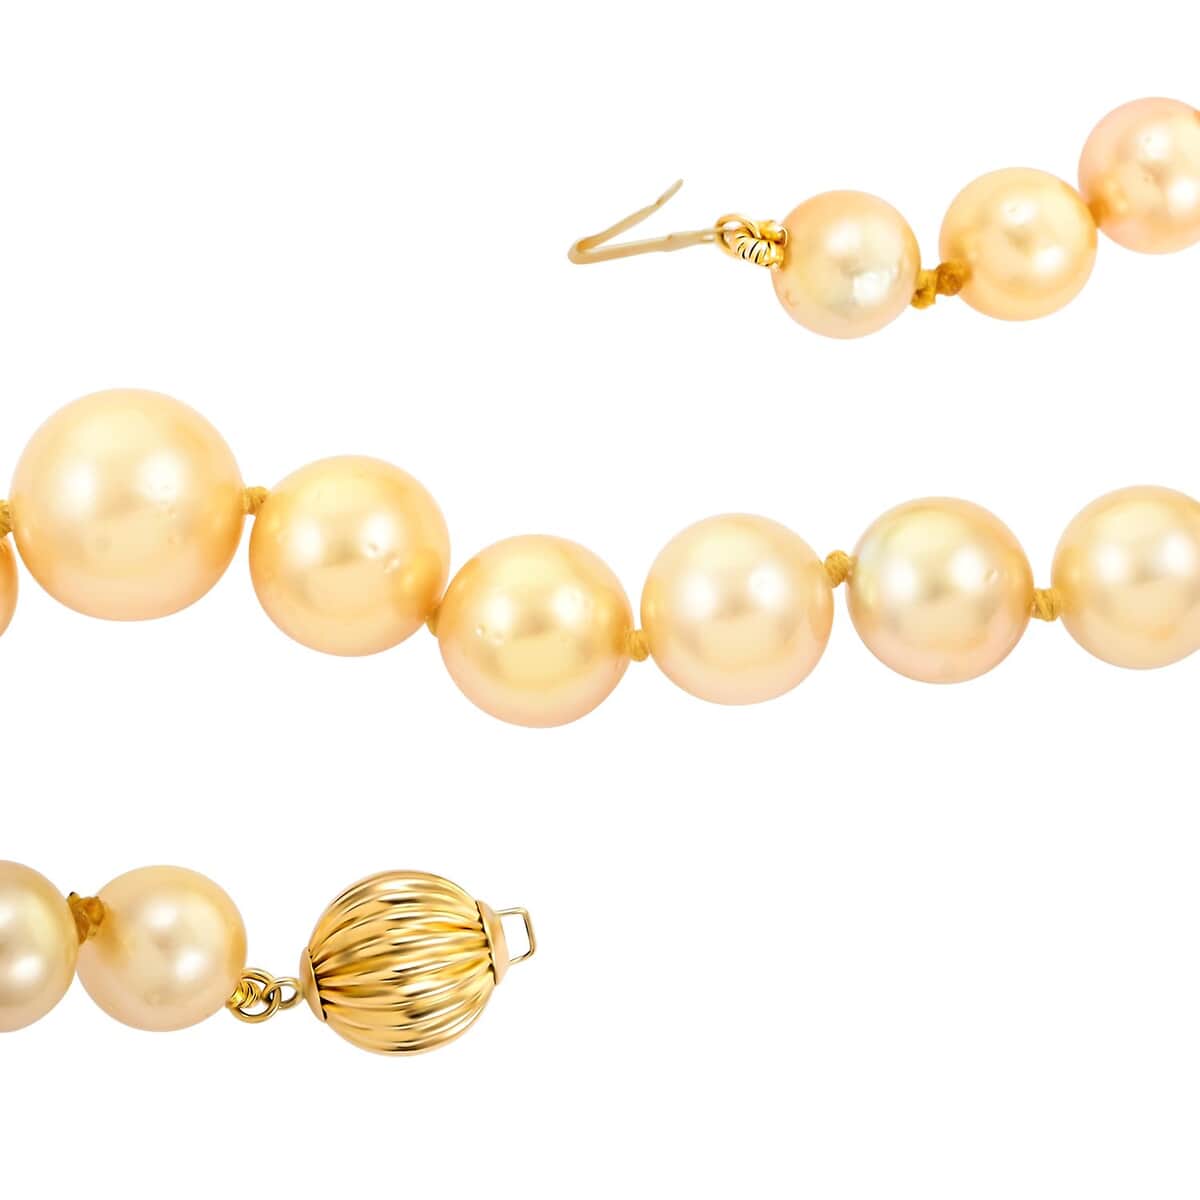 Iliana Certified & Appraised Aaaa South Sea Golden Pearl 8-10mm Graduation Necklace in 18K Yellow Gold (18 Inches), Pearl Jewelry for Women